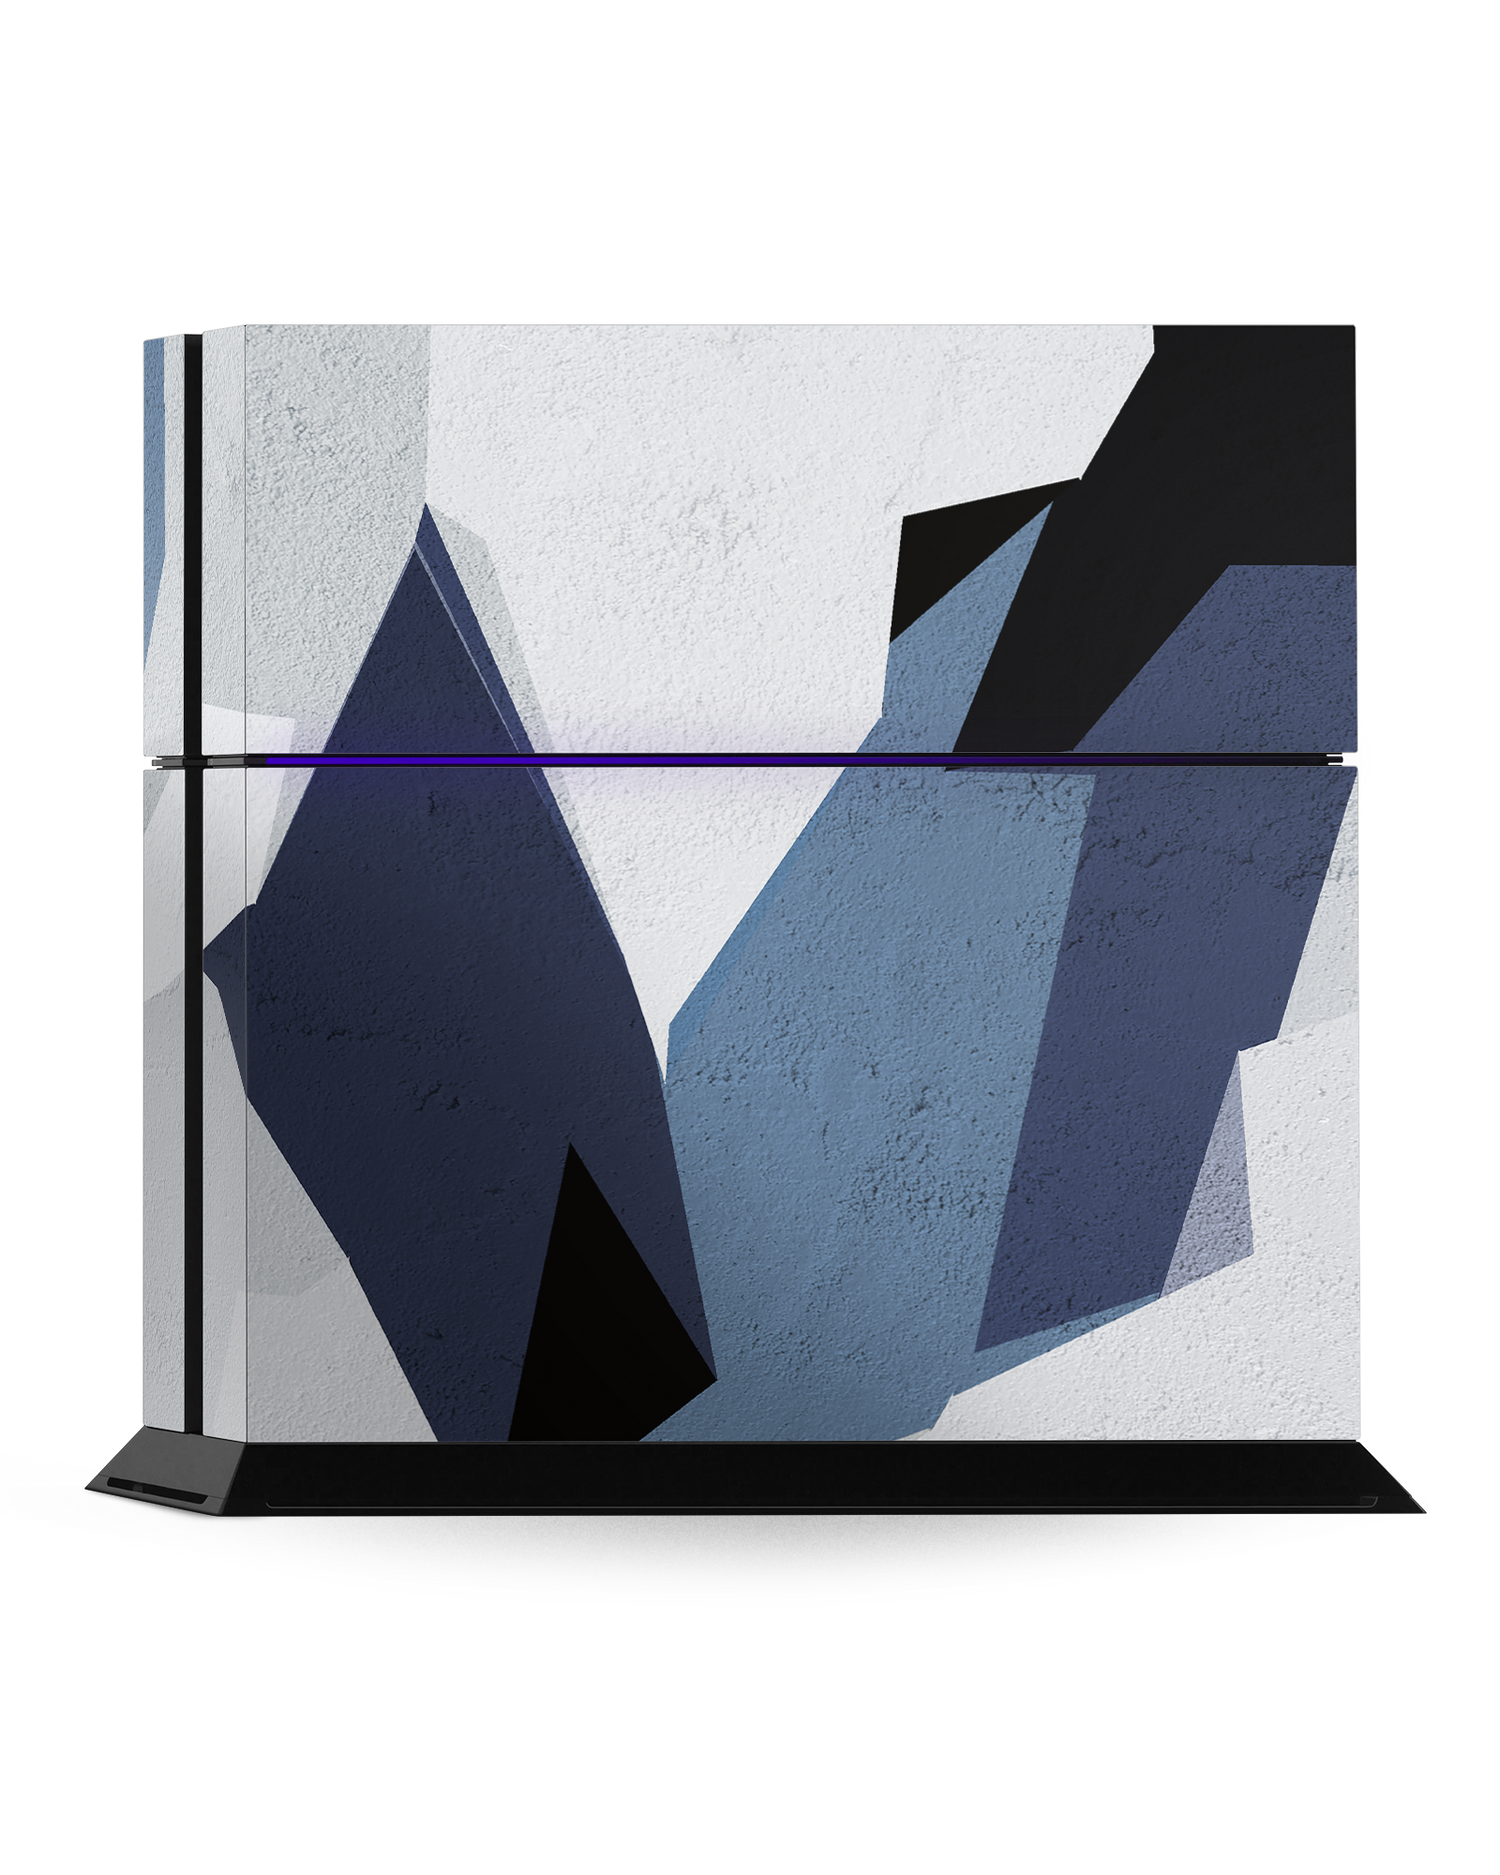 Geometric Camo Blue Console Skin for Sony PlayStation 4: Standing